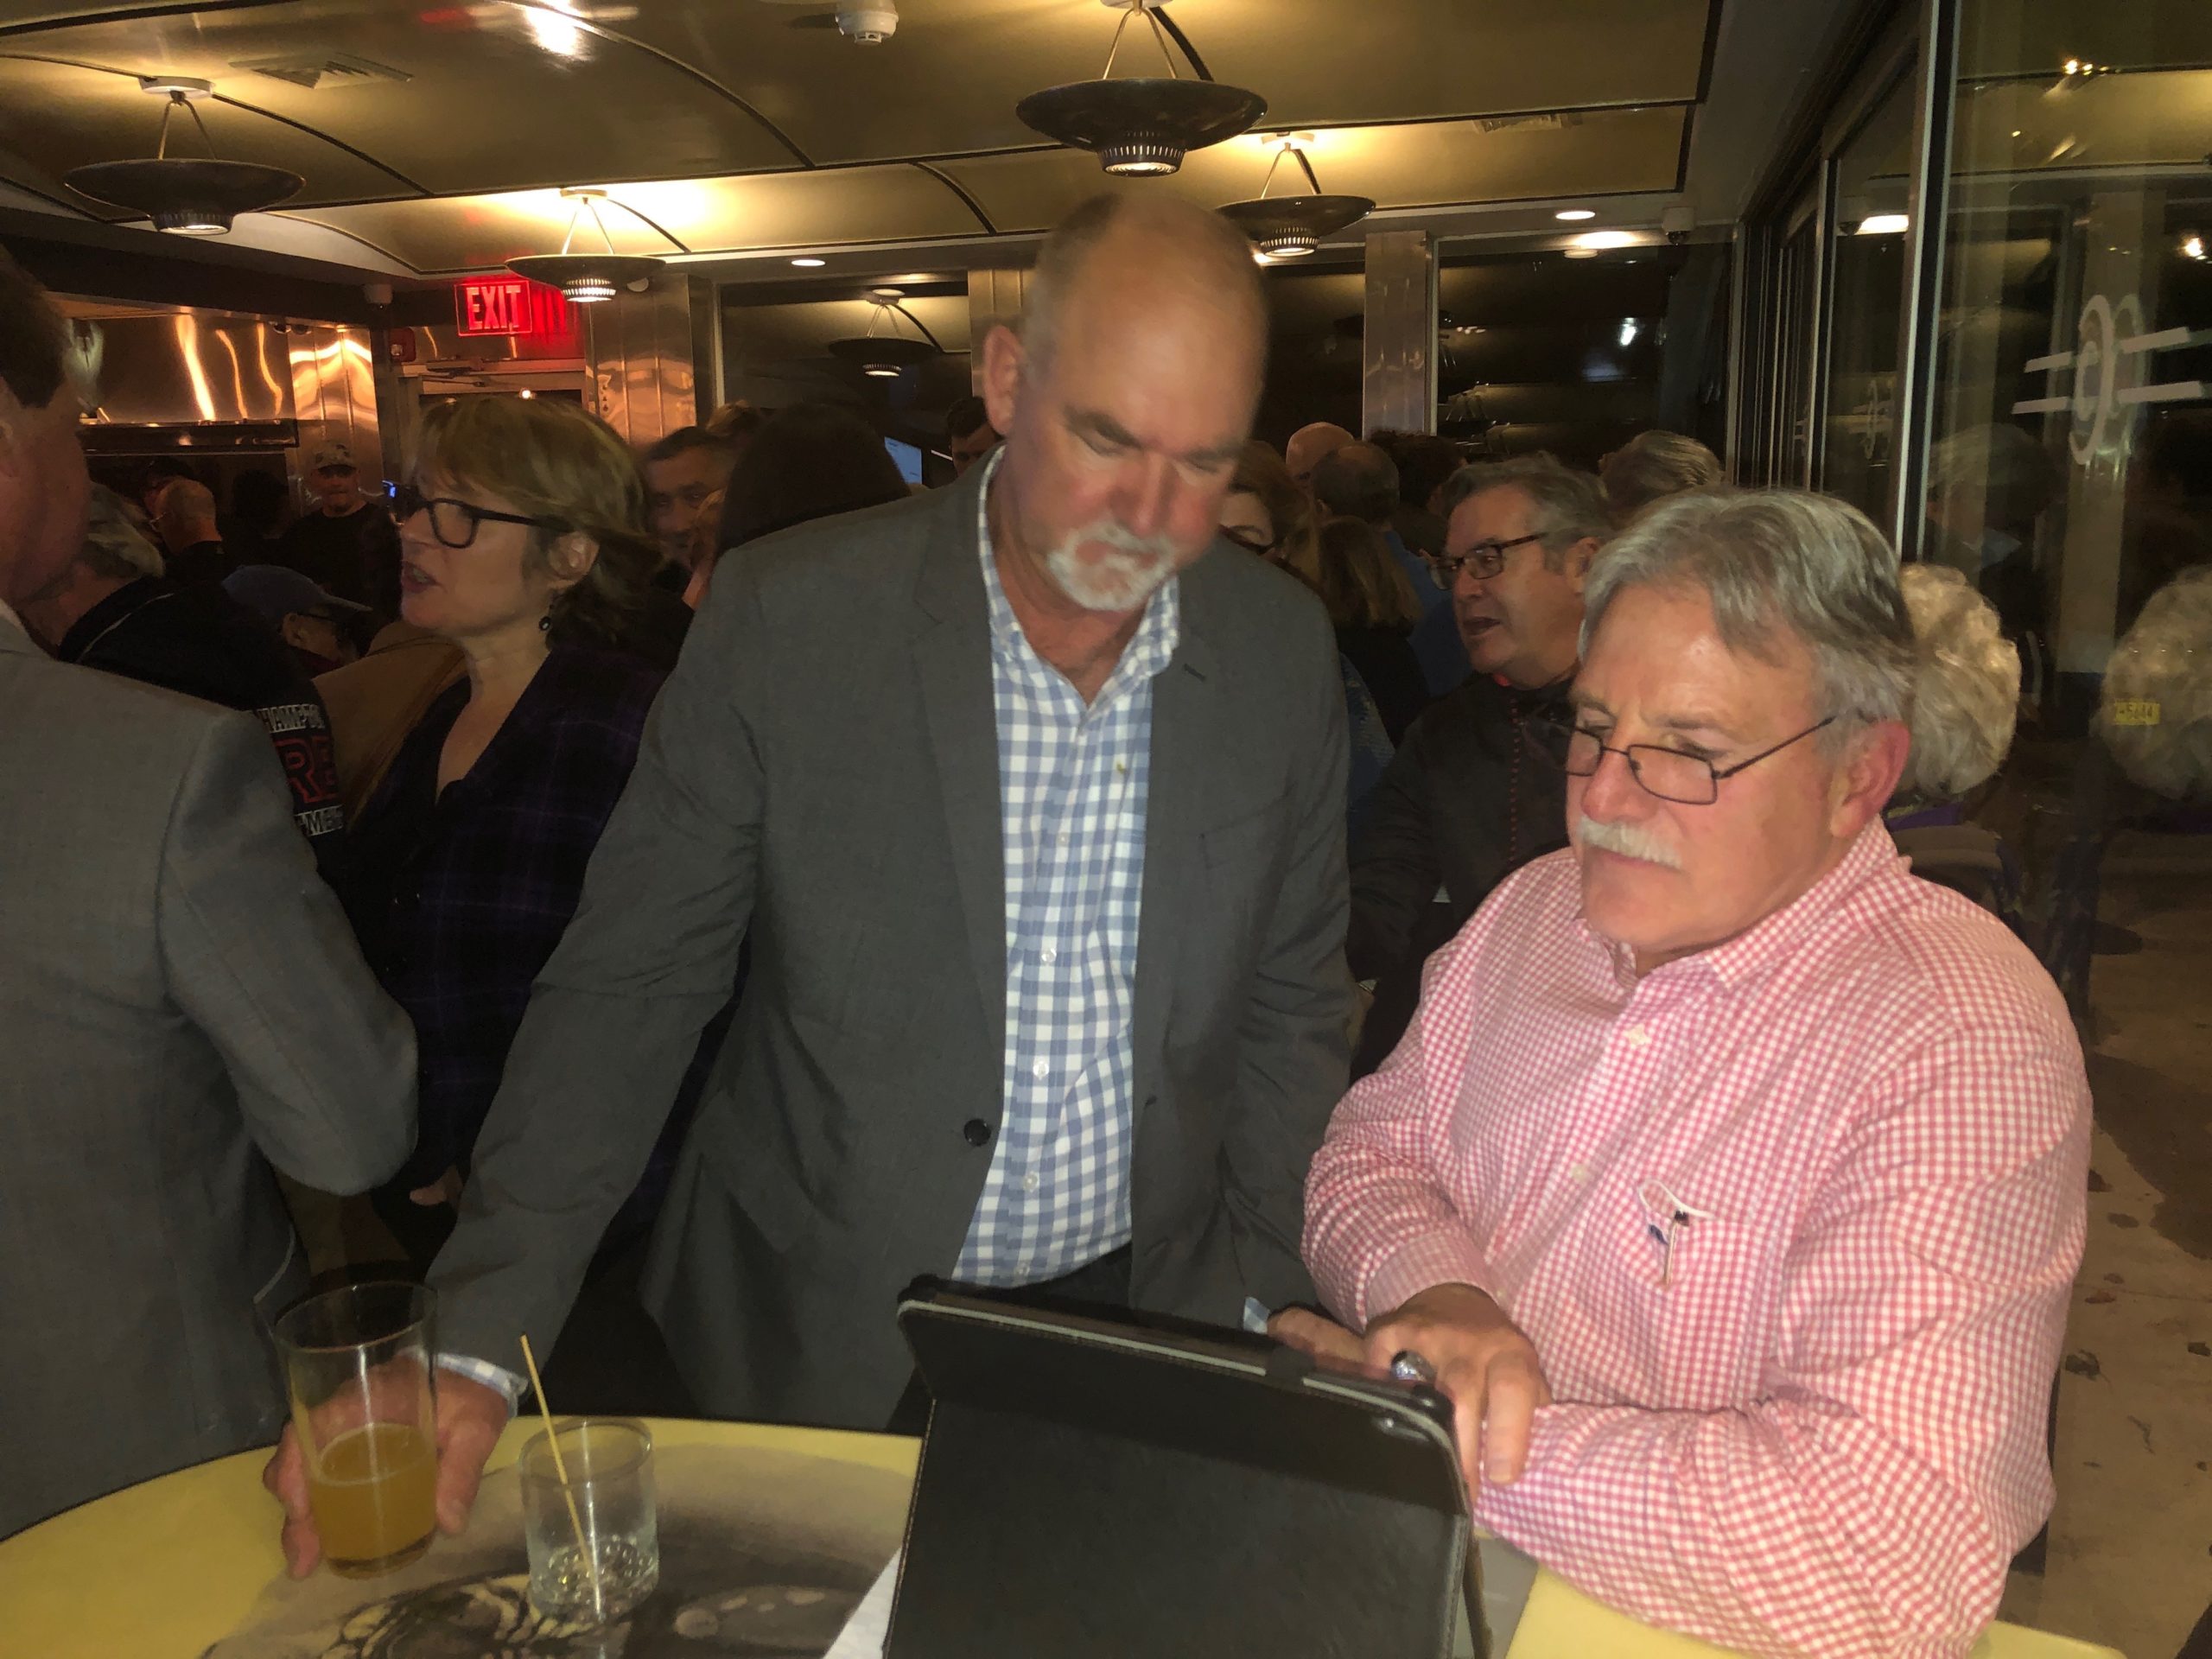 Supervisor Peter Van Scoyoc and Chris Kelly watch election returns on Tuesday night at Democratic headquarters. MICHAEL HELLER